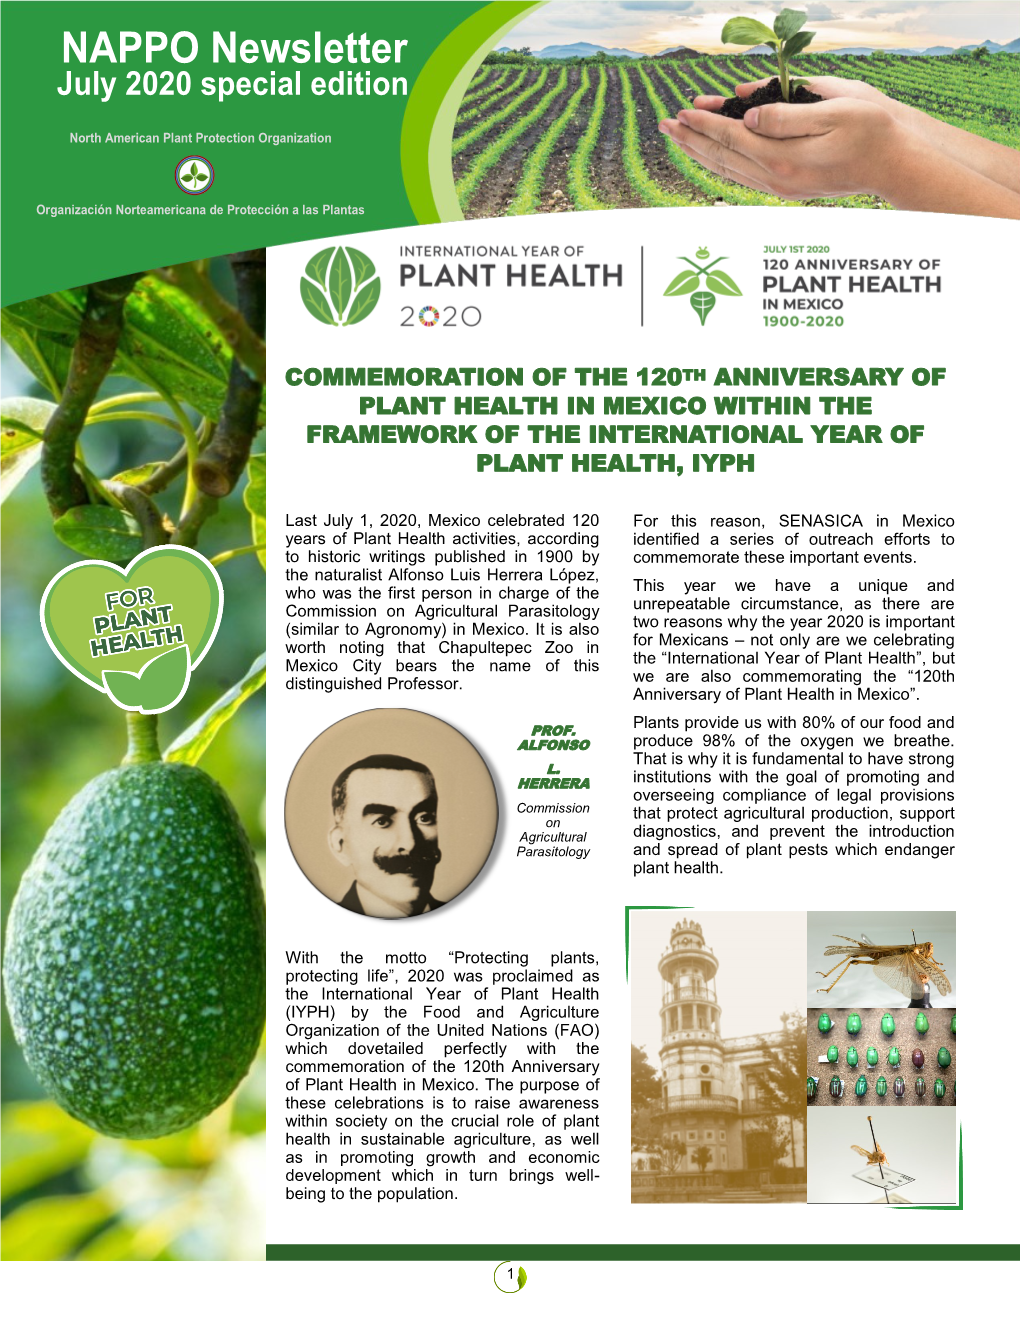 Commemoration of the 120Th Anniversary of Plant Health in Mexico Within the Framework of the International Year of Plant Health, Iyph